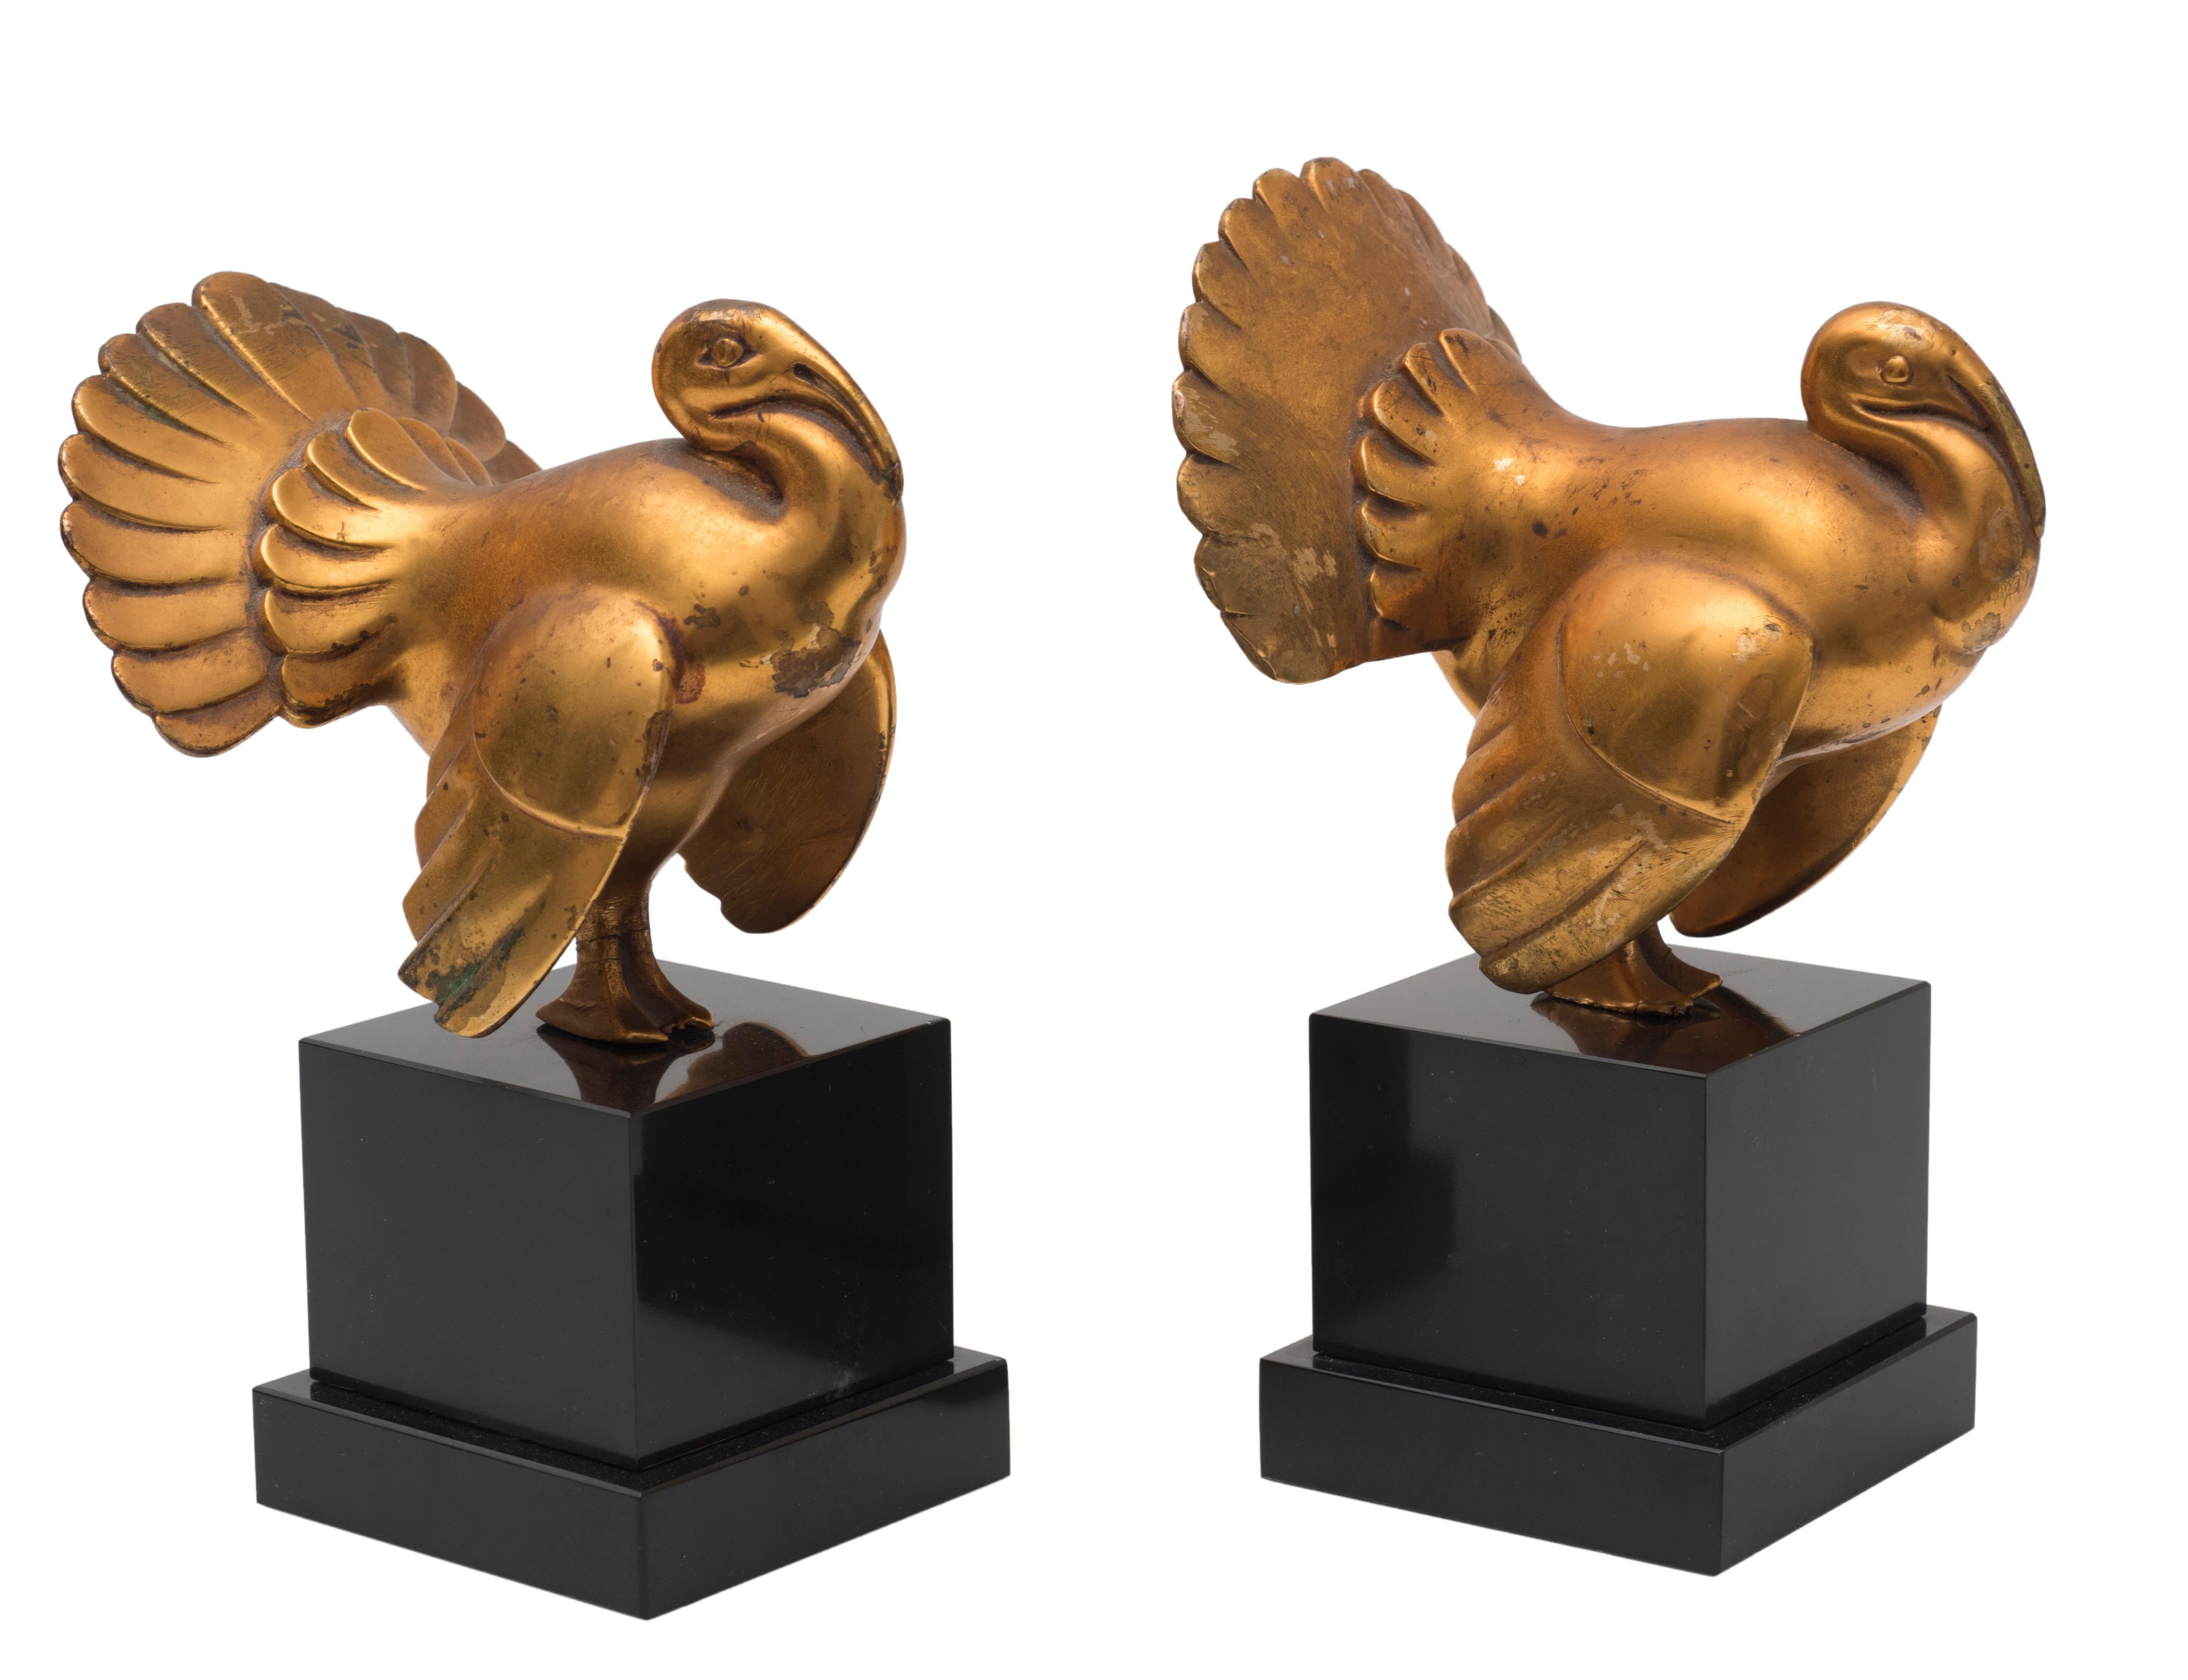 These Turkeys bookends are a vintage couple of gilded metal bookends realized in the 1920s by Italian manufacture.

Original decorative objects realized in gilded metal and black marble base.

This object is shipped from Italy. Under existing